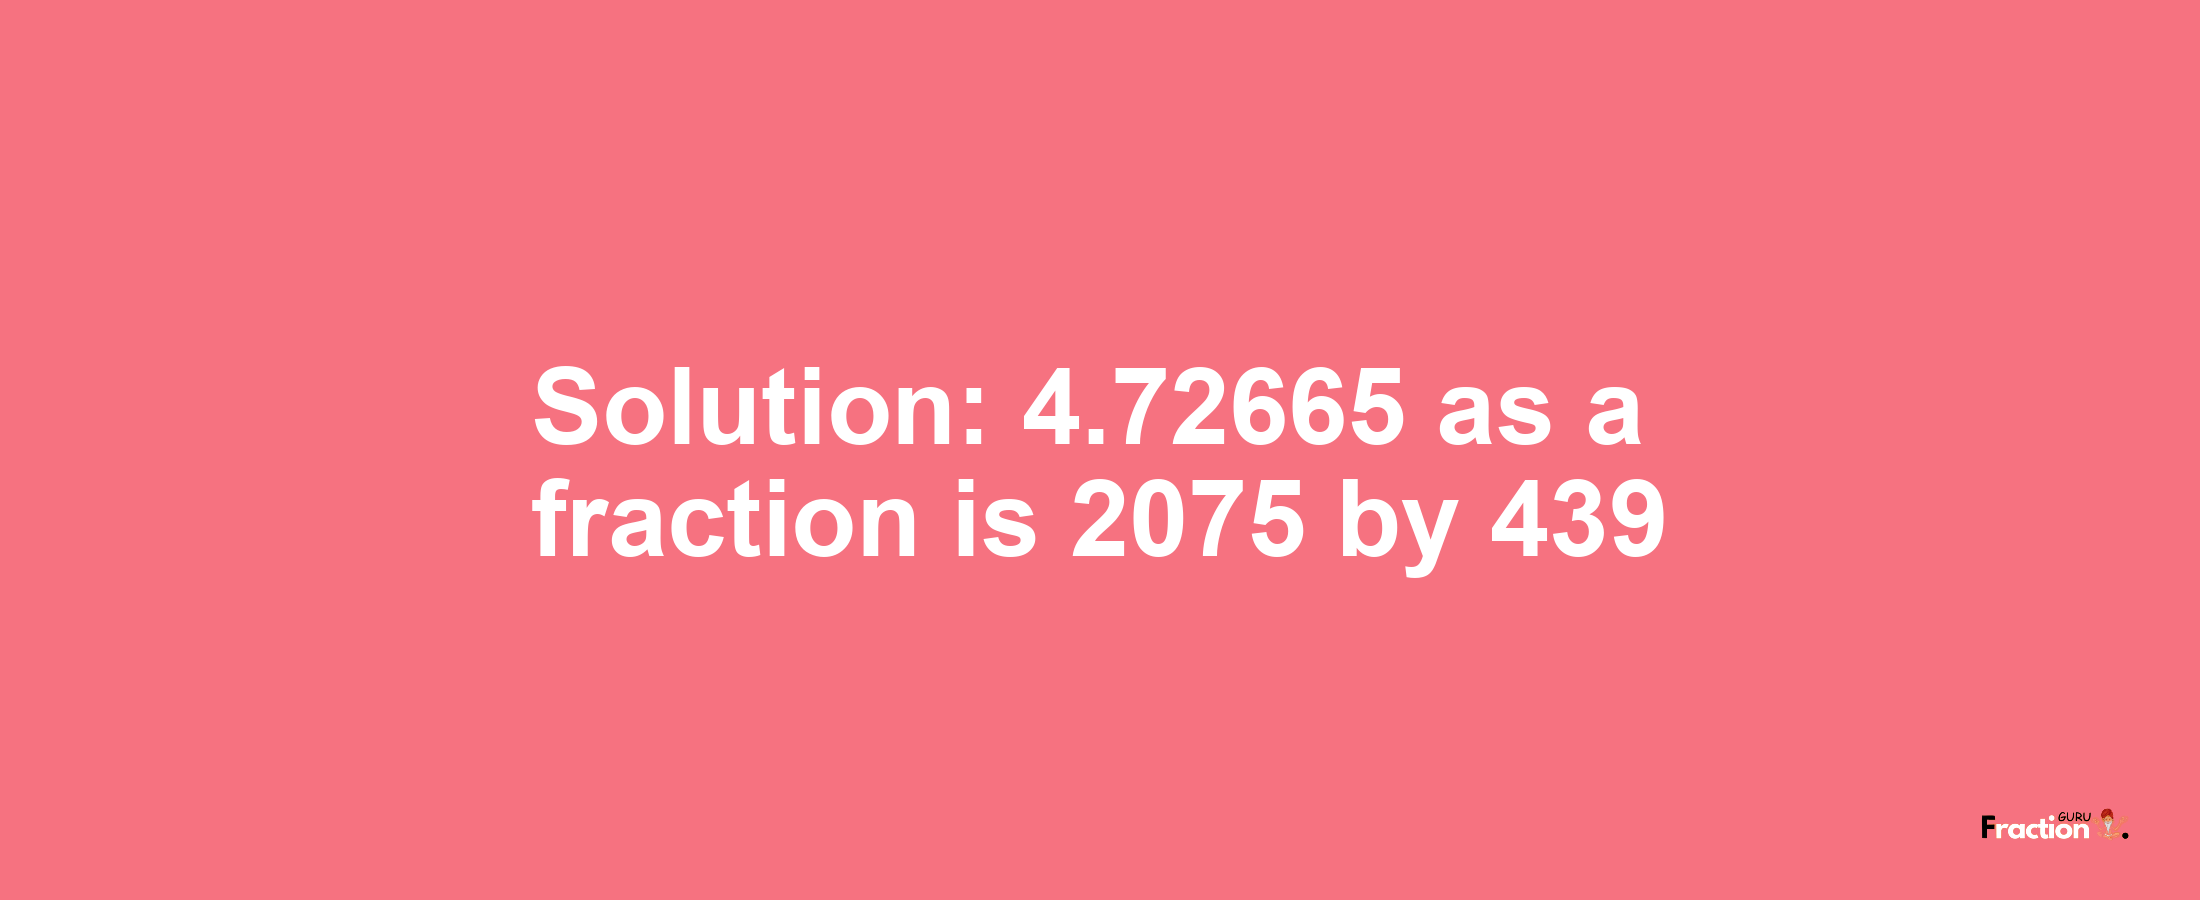 Solution:4.72665 as a fraction is 2075/439